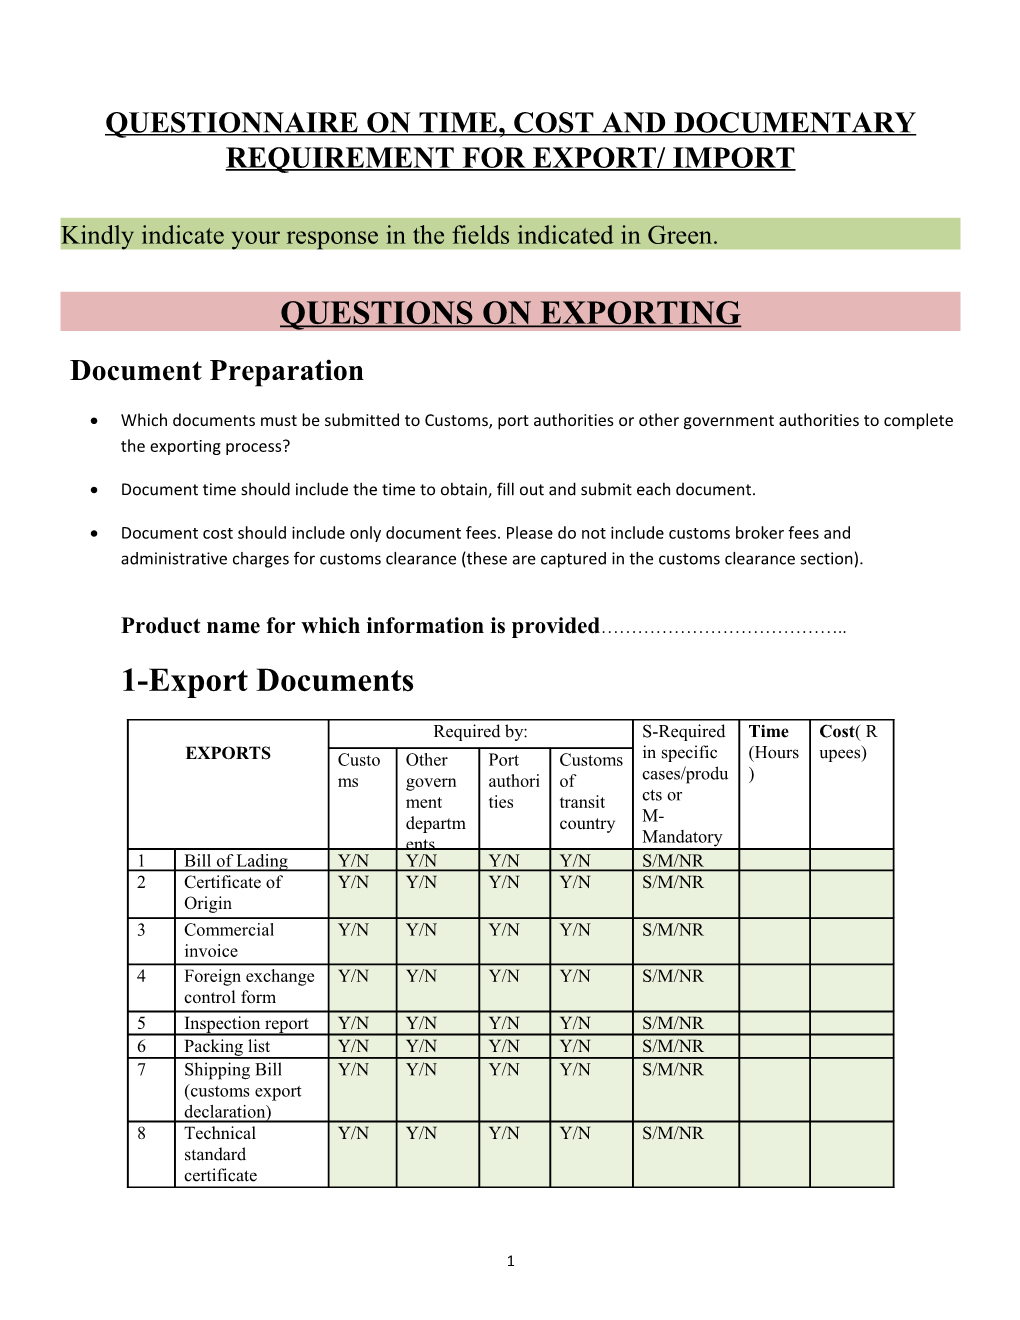 Questionnaire on Time, Cost and Documentary Requirement for Export/ Import